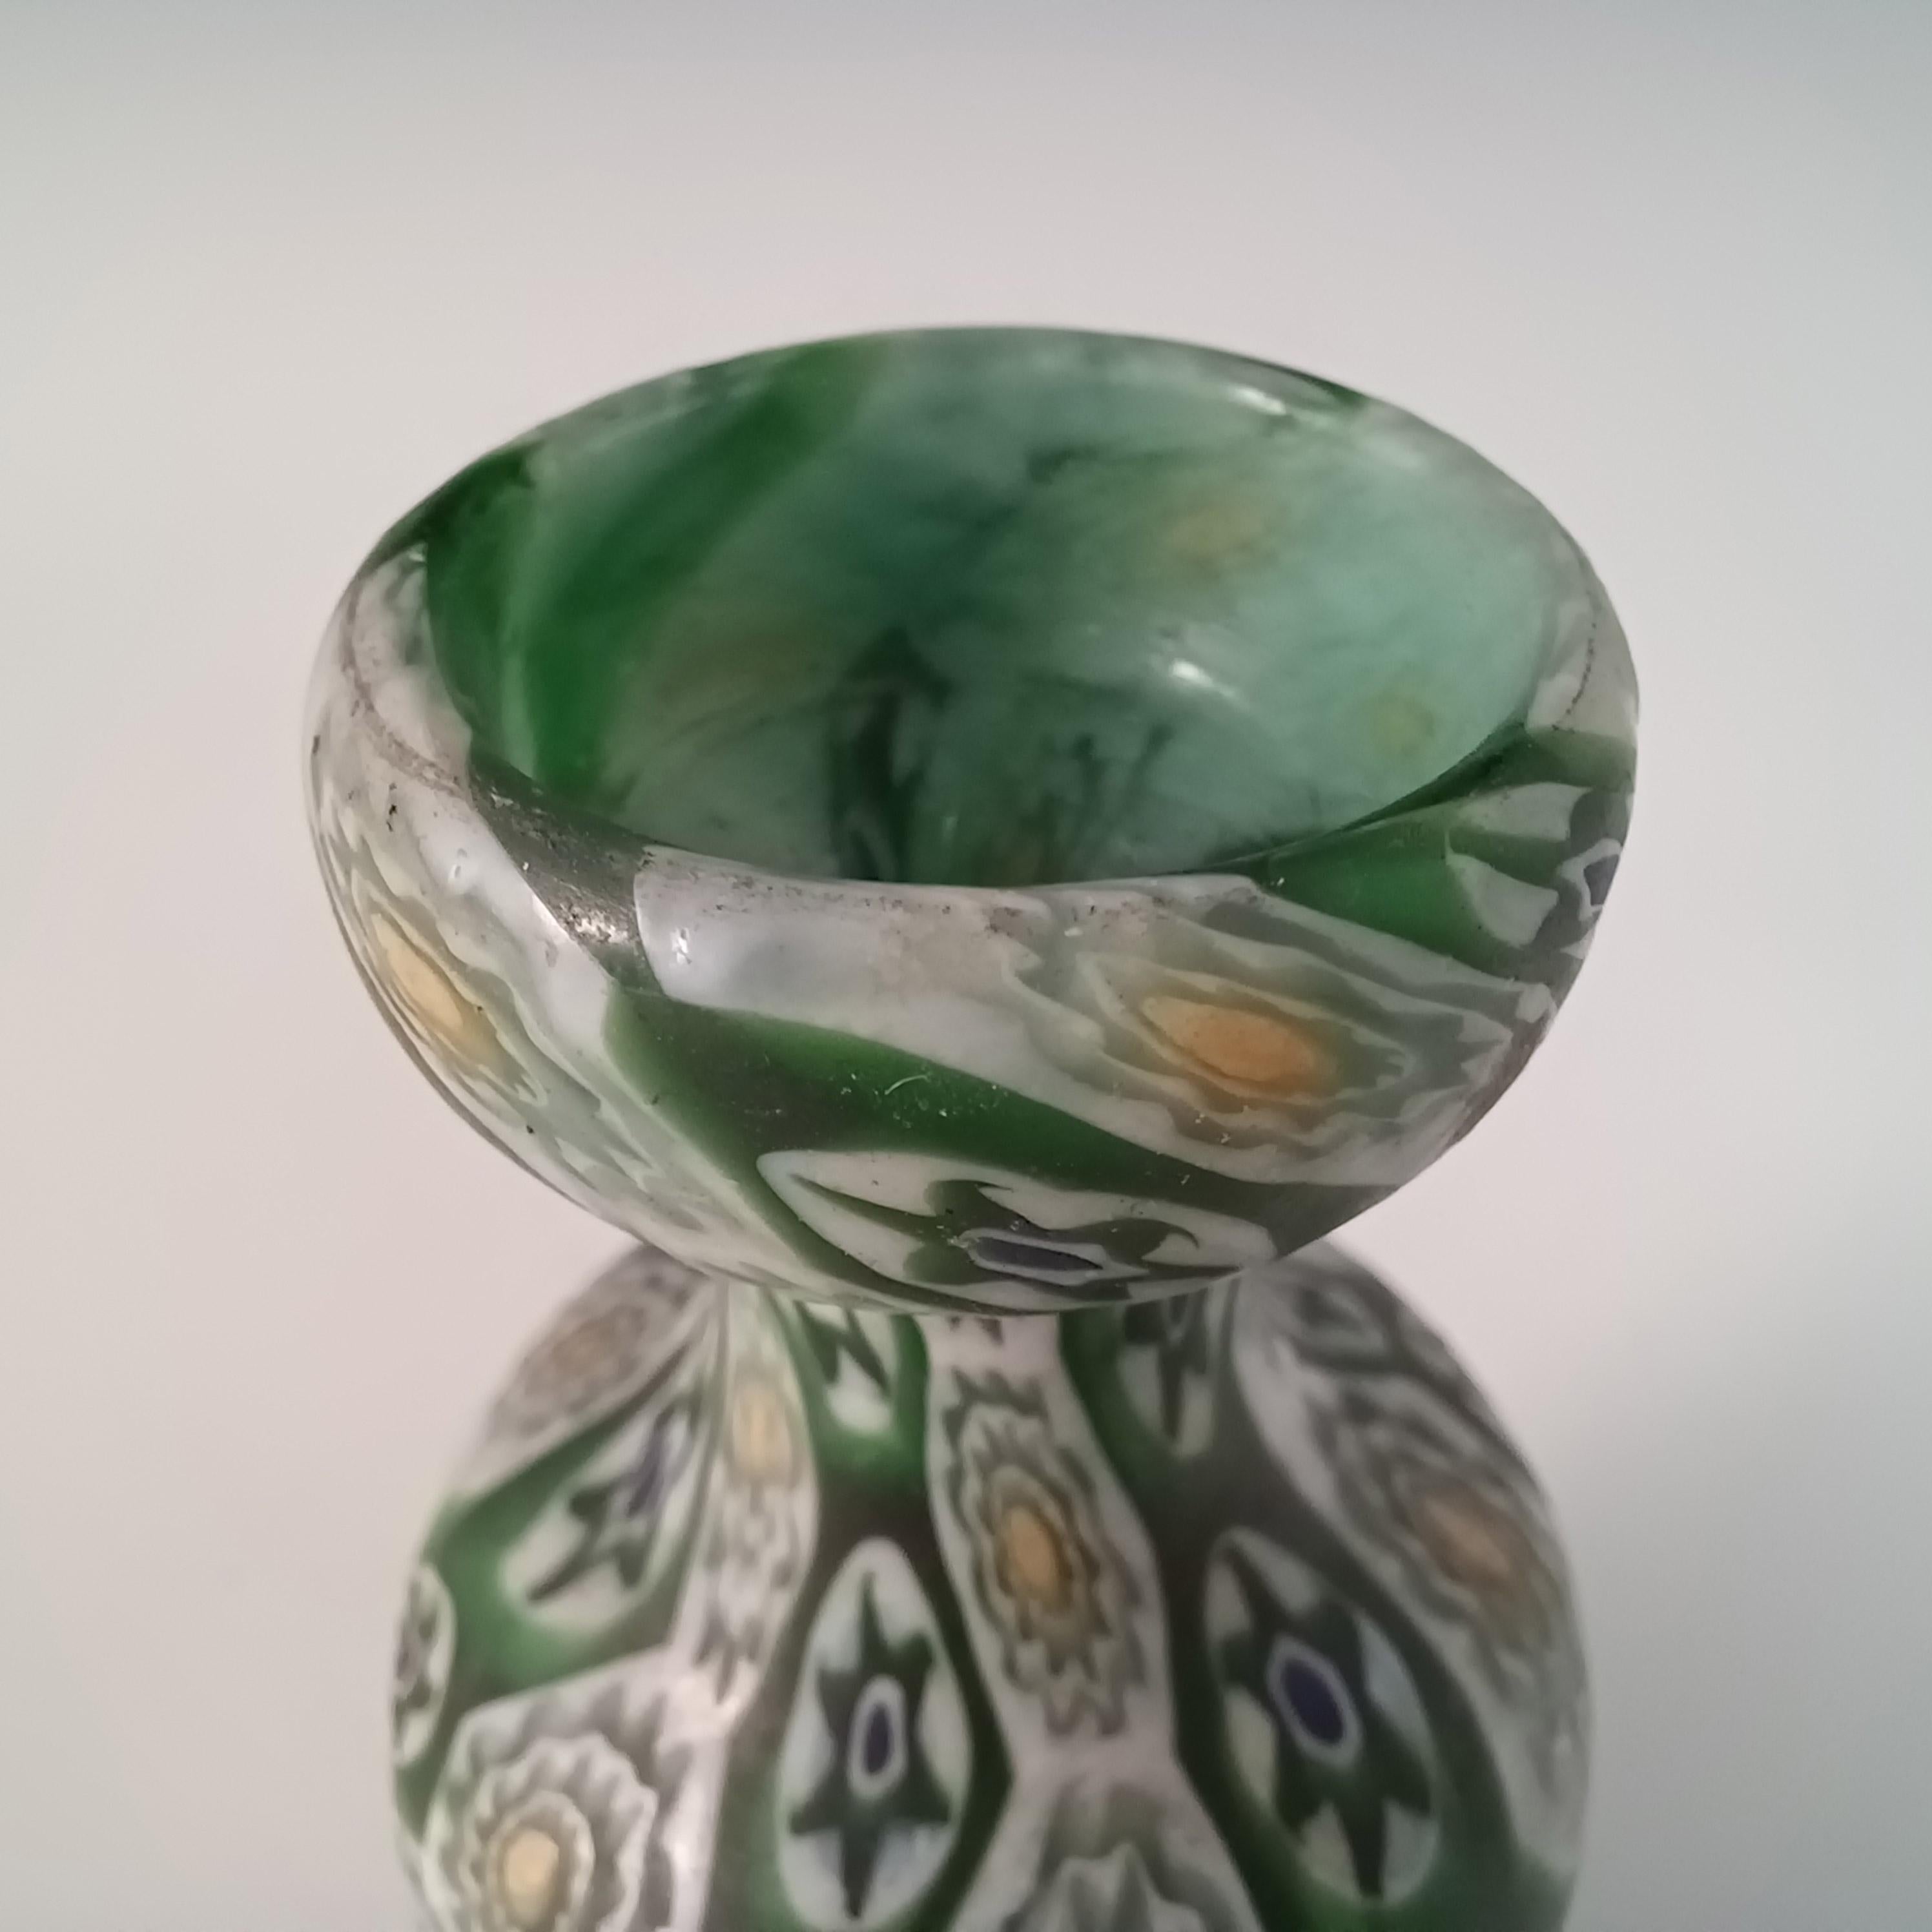 Hand-Crafted Fratelli Toso Millefiori Canes Murano Green & White Glass Vase For Sale